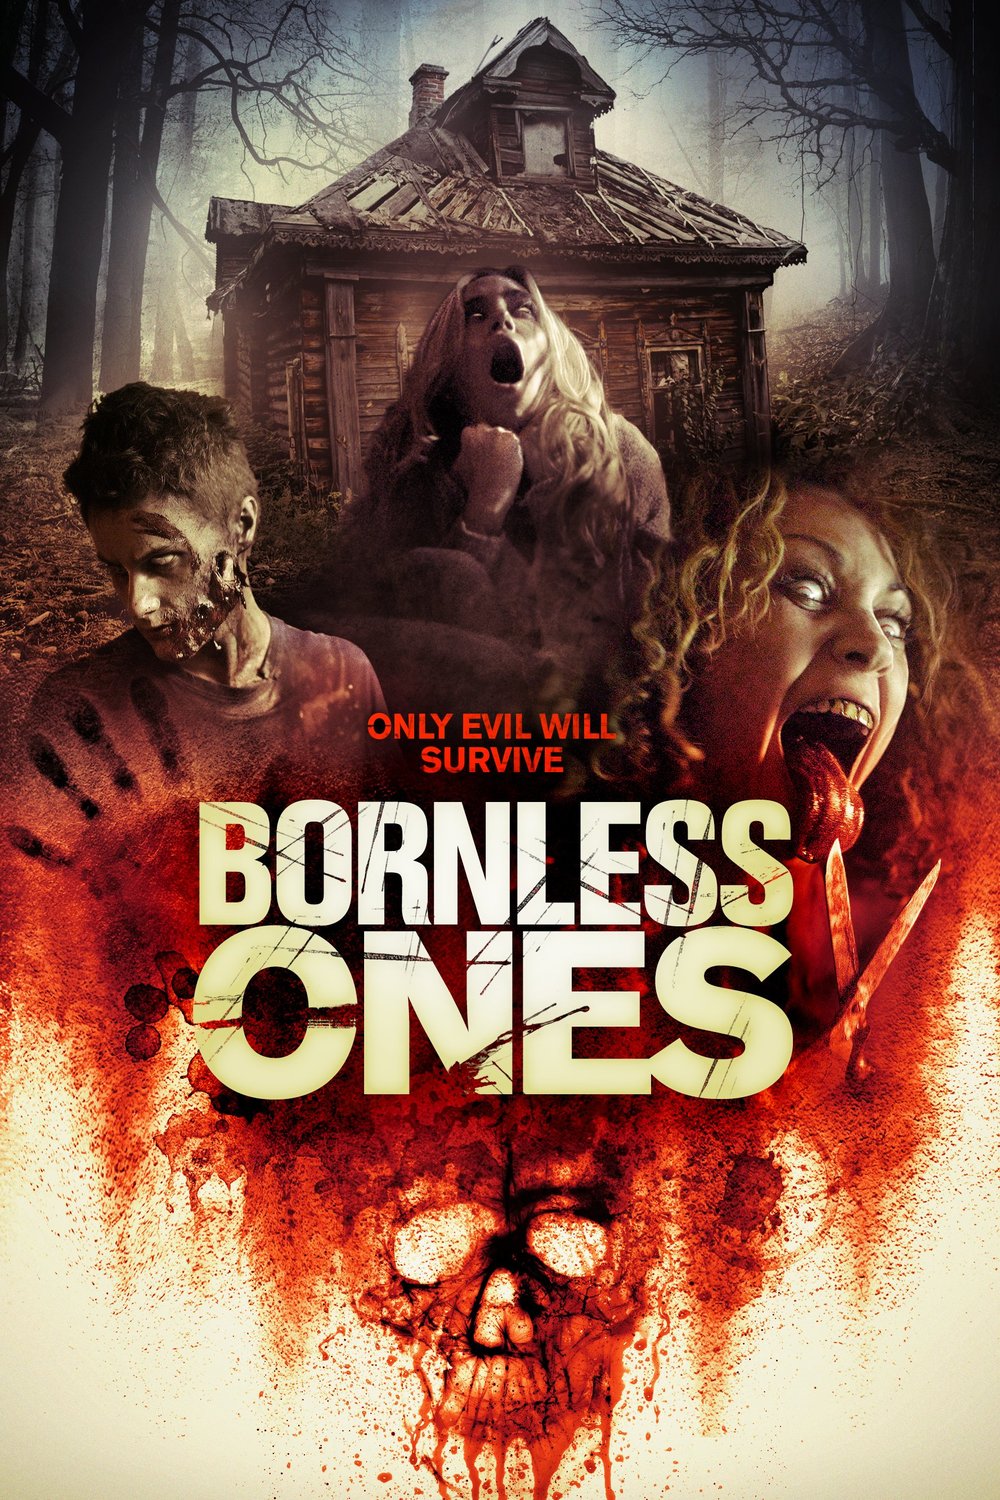 Poster of the movie Bornless Ones